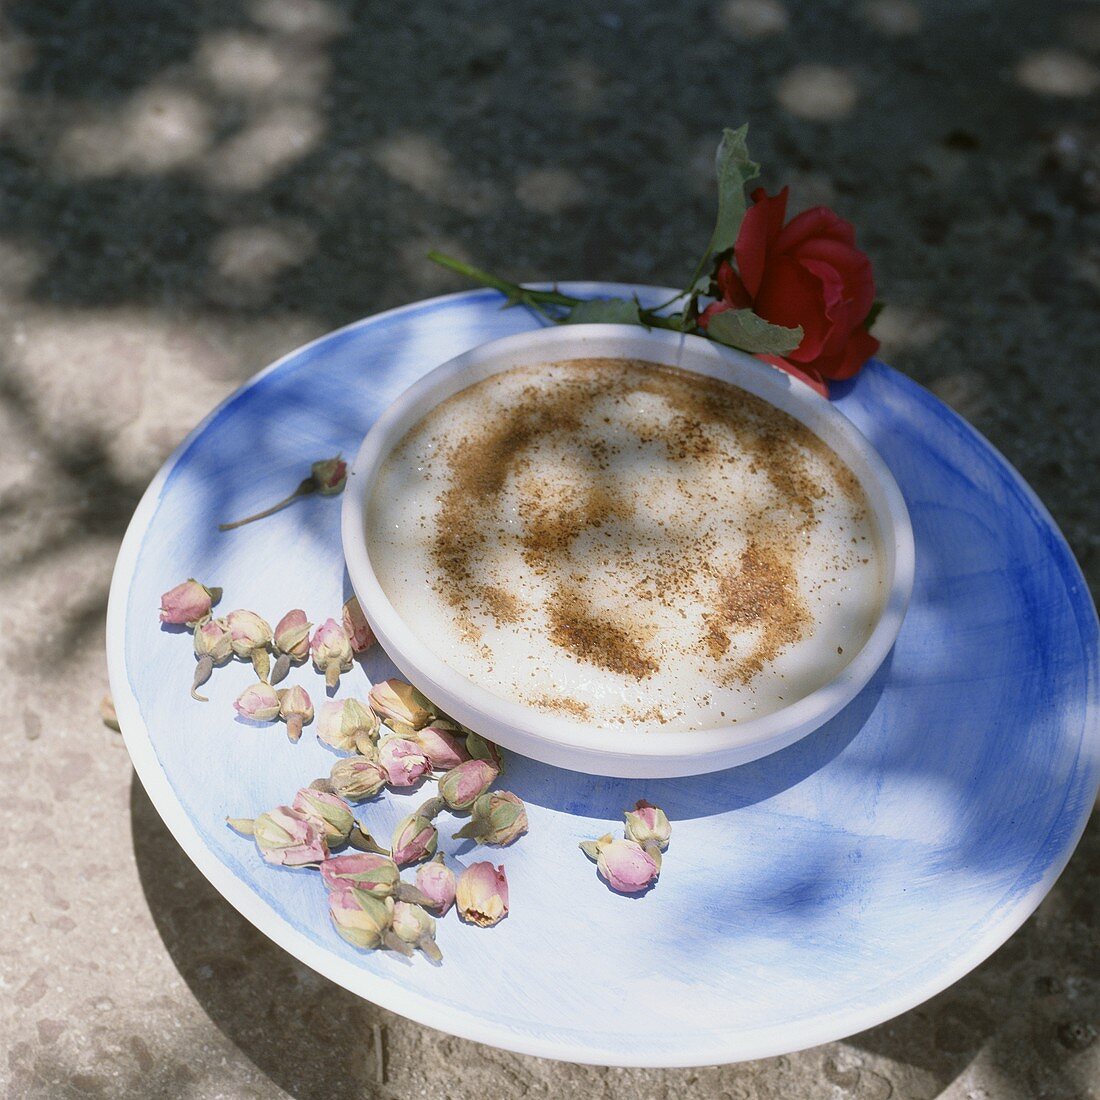 A bowl of cinnamon pudding decorated with flowers